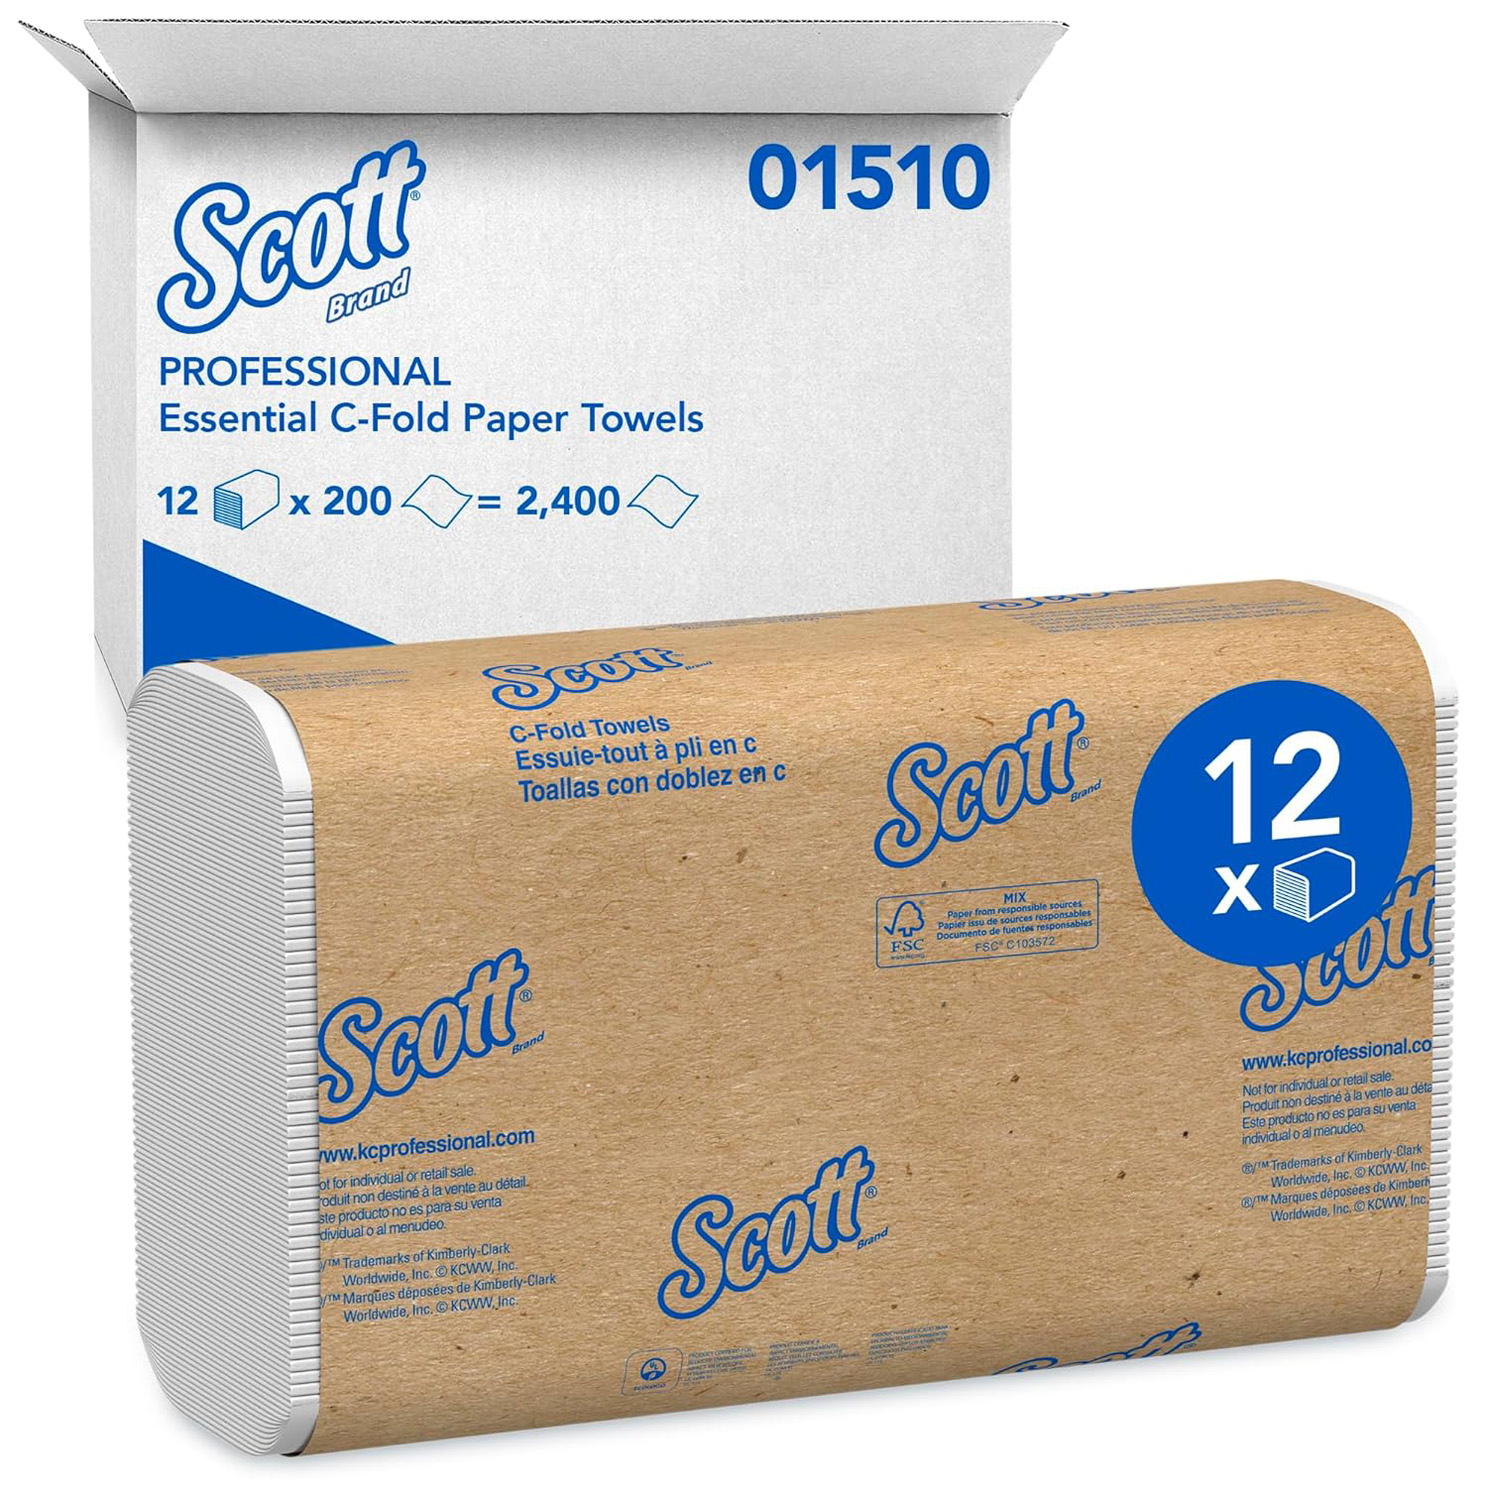 Scott Essential C Fold Paper Towels (01510) with Fast-Drying Absorbency Pockets